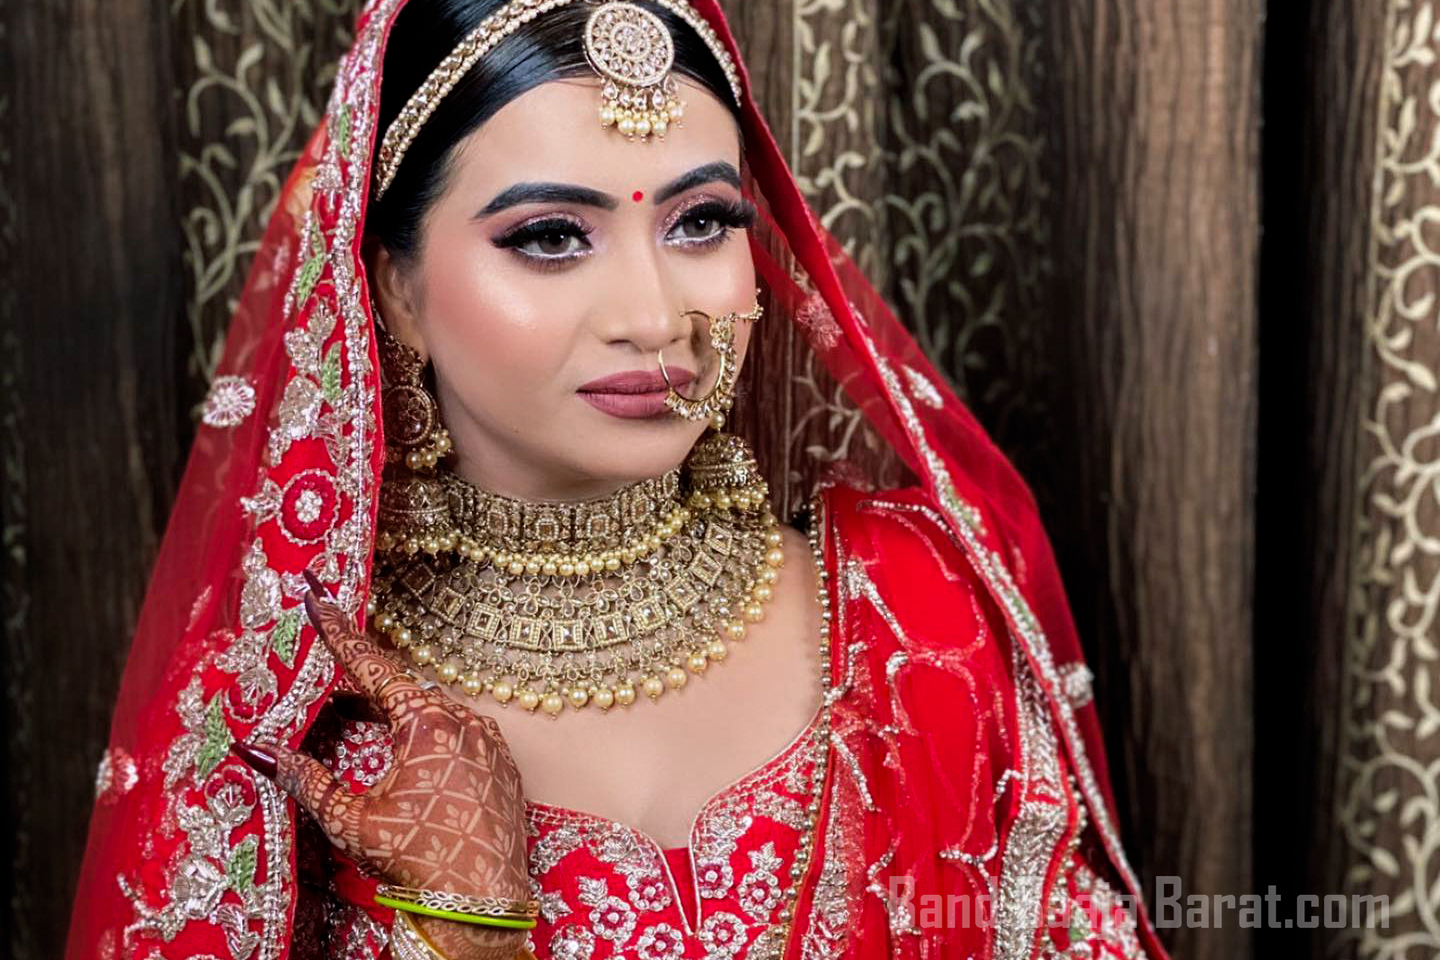 Sonal Sharma Makeovers Hair, Beauty and Grooming services